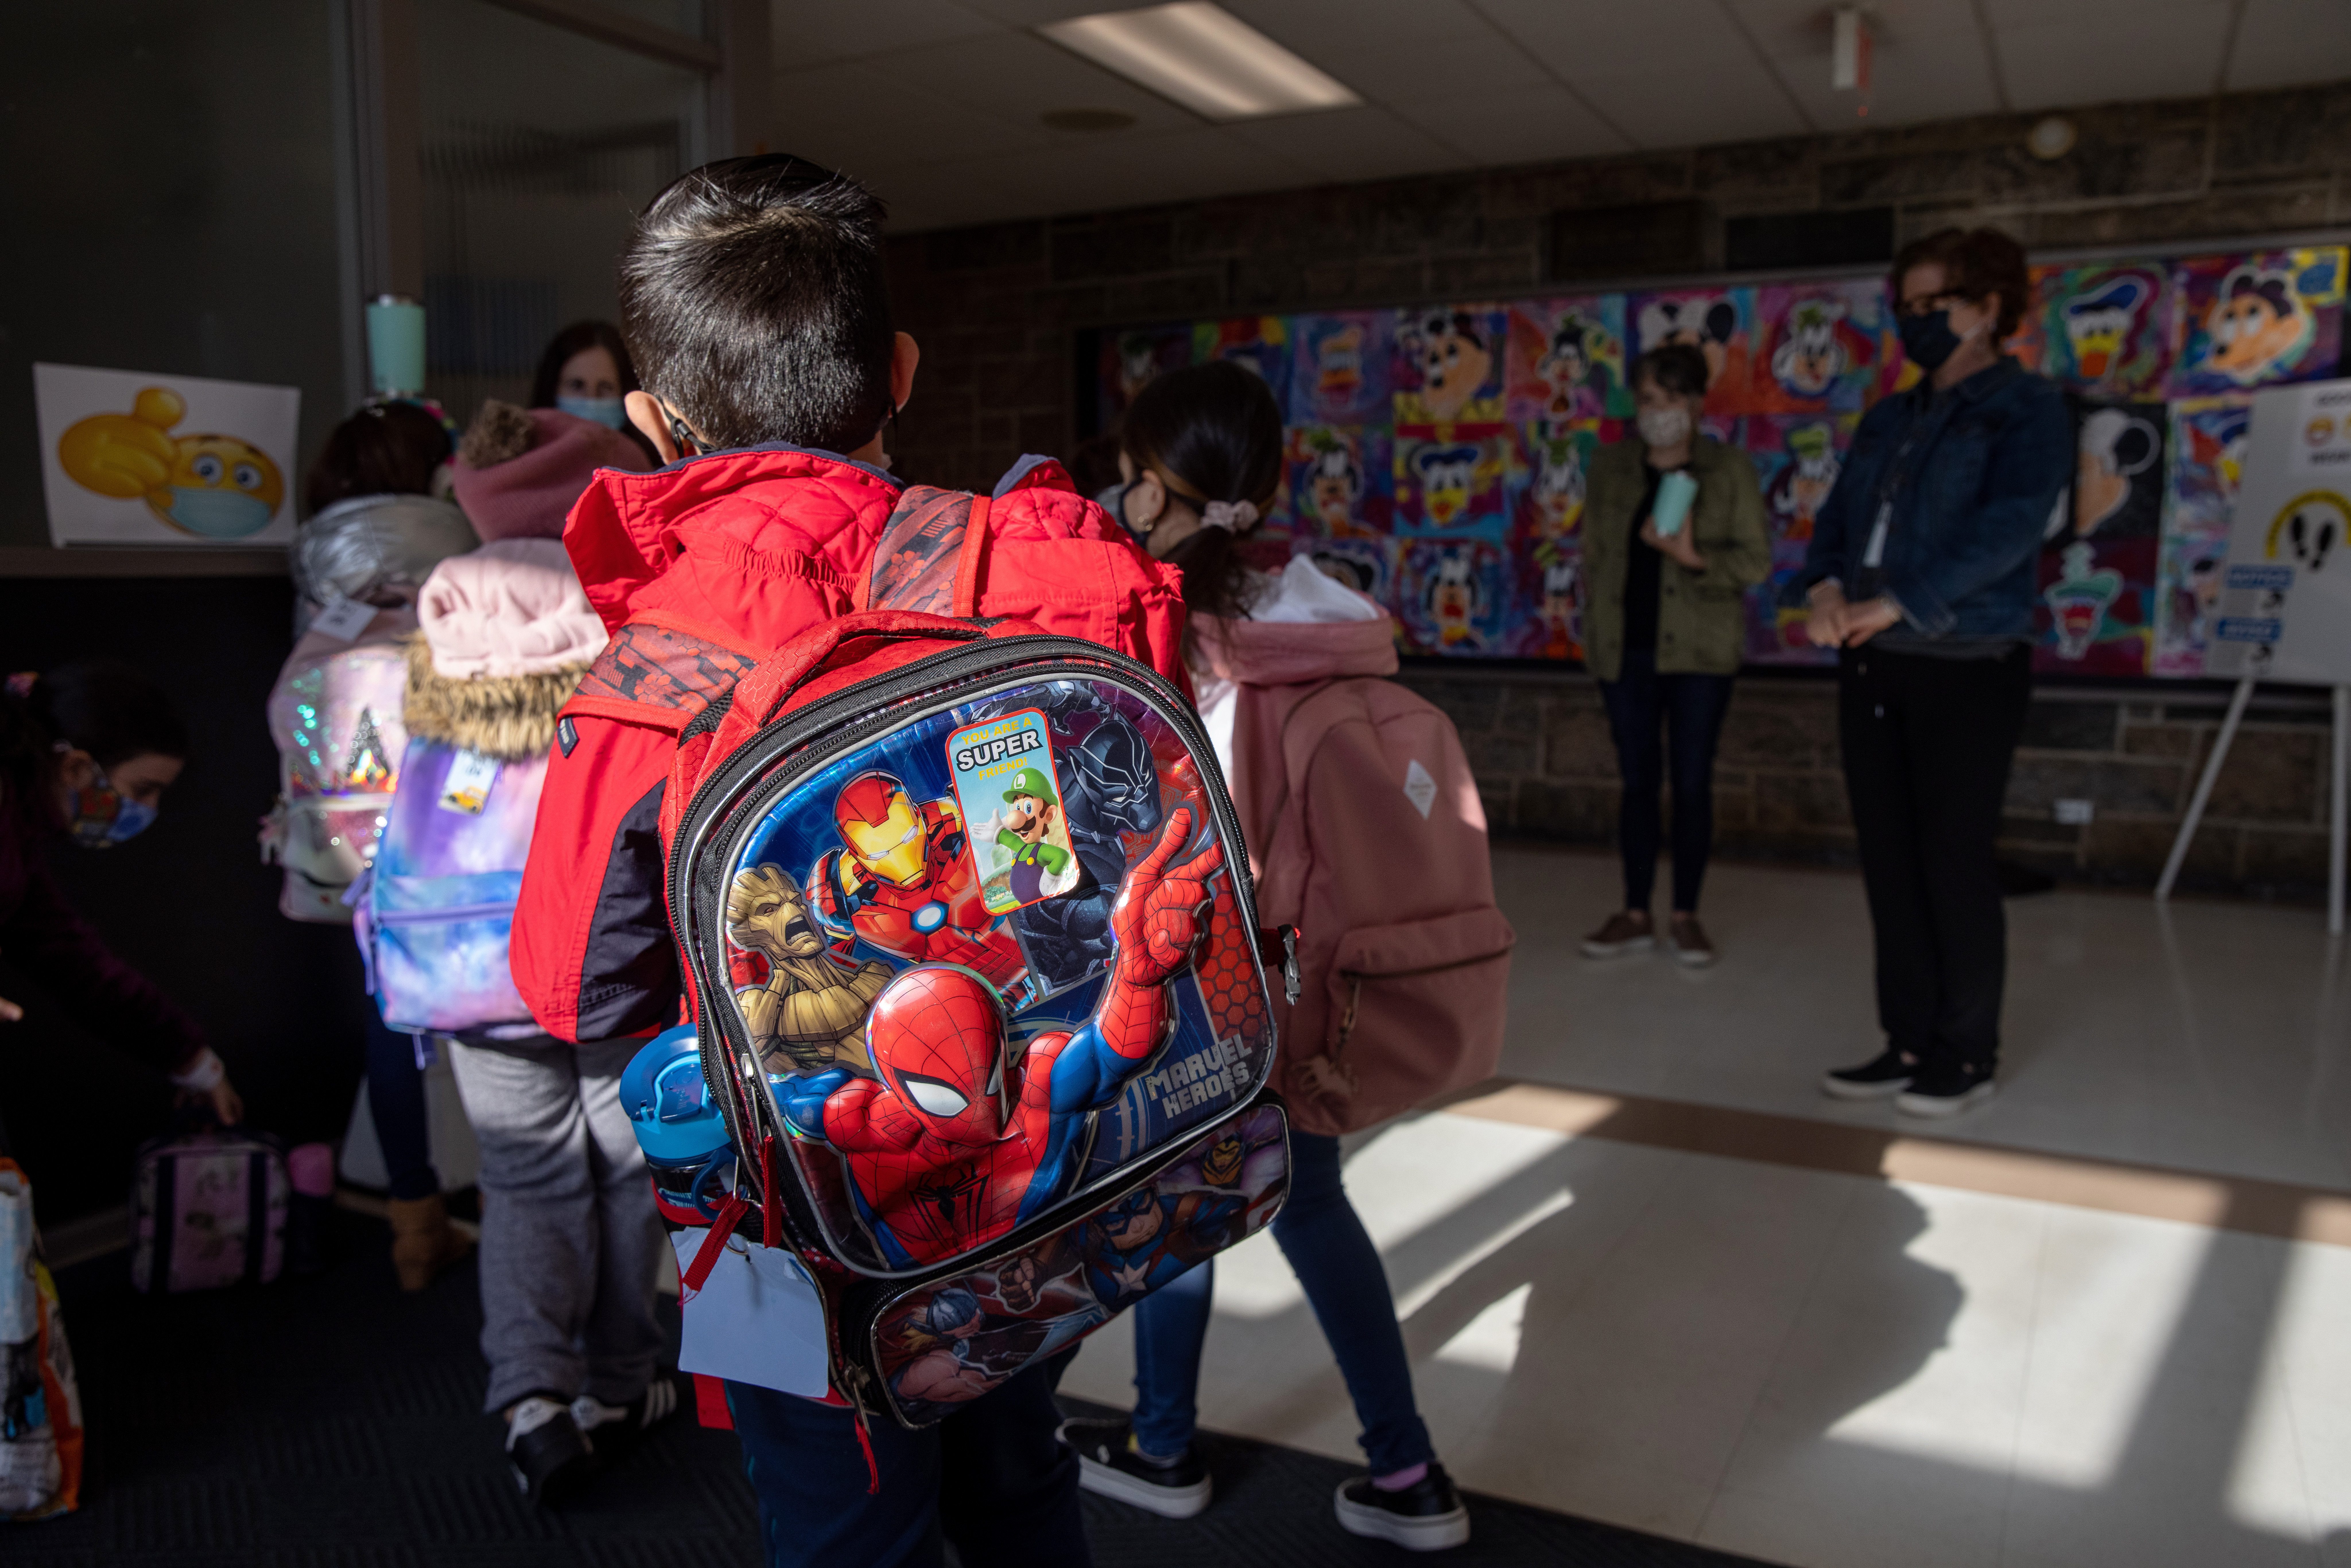 Students arrive for the first day of in-person learning for five days per week at Stark Elementary School on March 10, 2021 in Stamford, Connecticut. Stamford Public Schools, like many school districts nationwide, are returning to full time in-school learning as pandemic restrictions begin to ease. The district had been operating on a hybrid model for most of the school year. (Photo by John Moore/Getty Images)